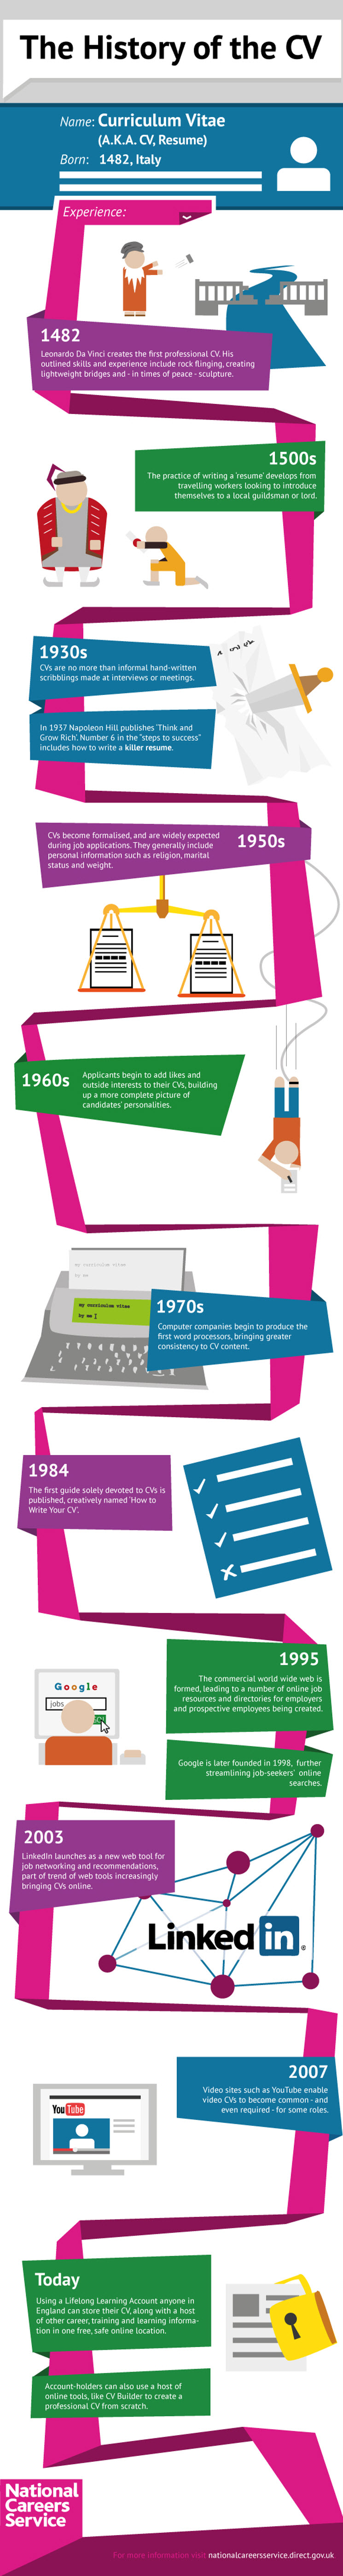 The History of CV- infographic